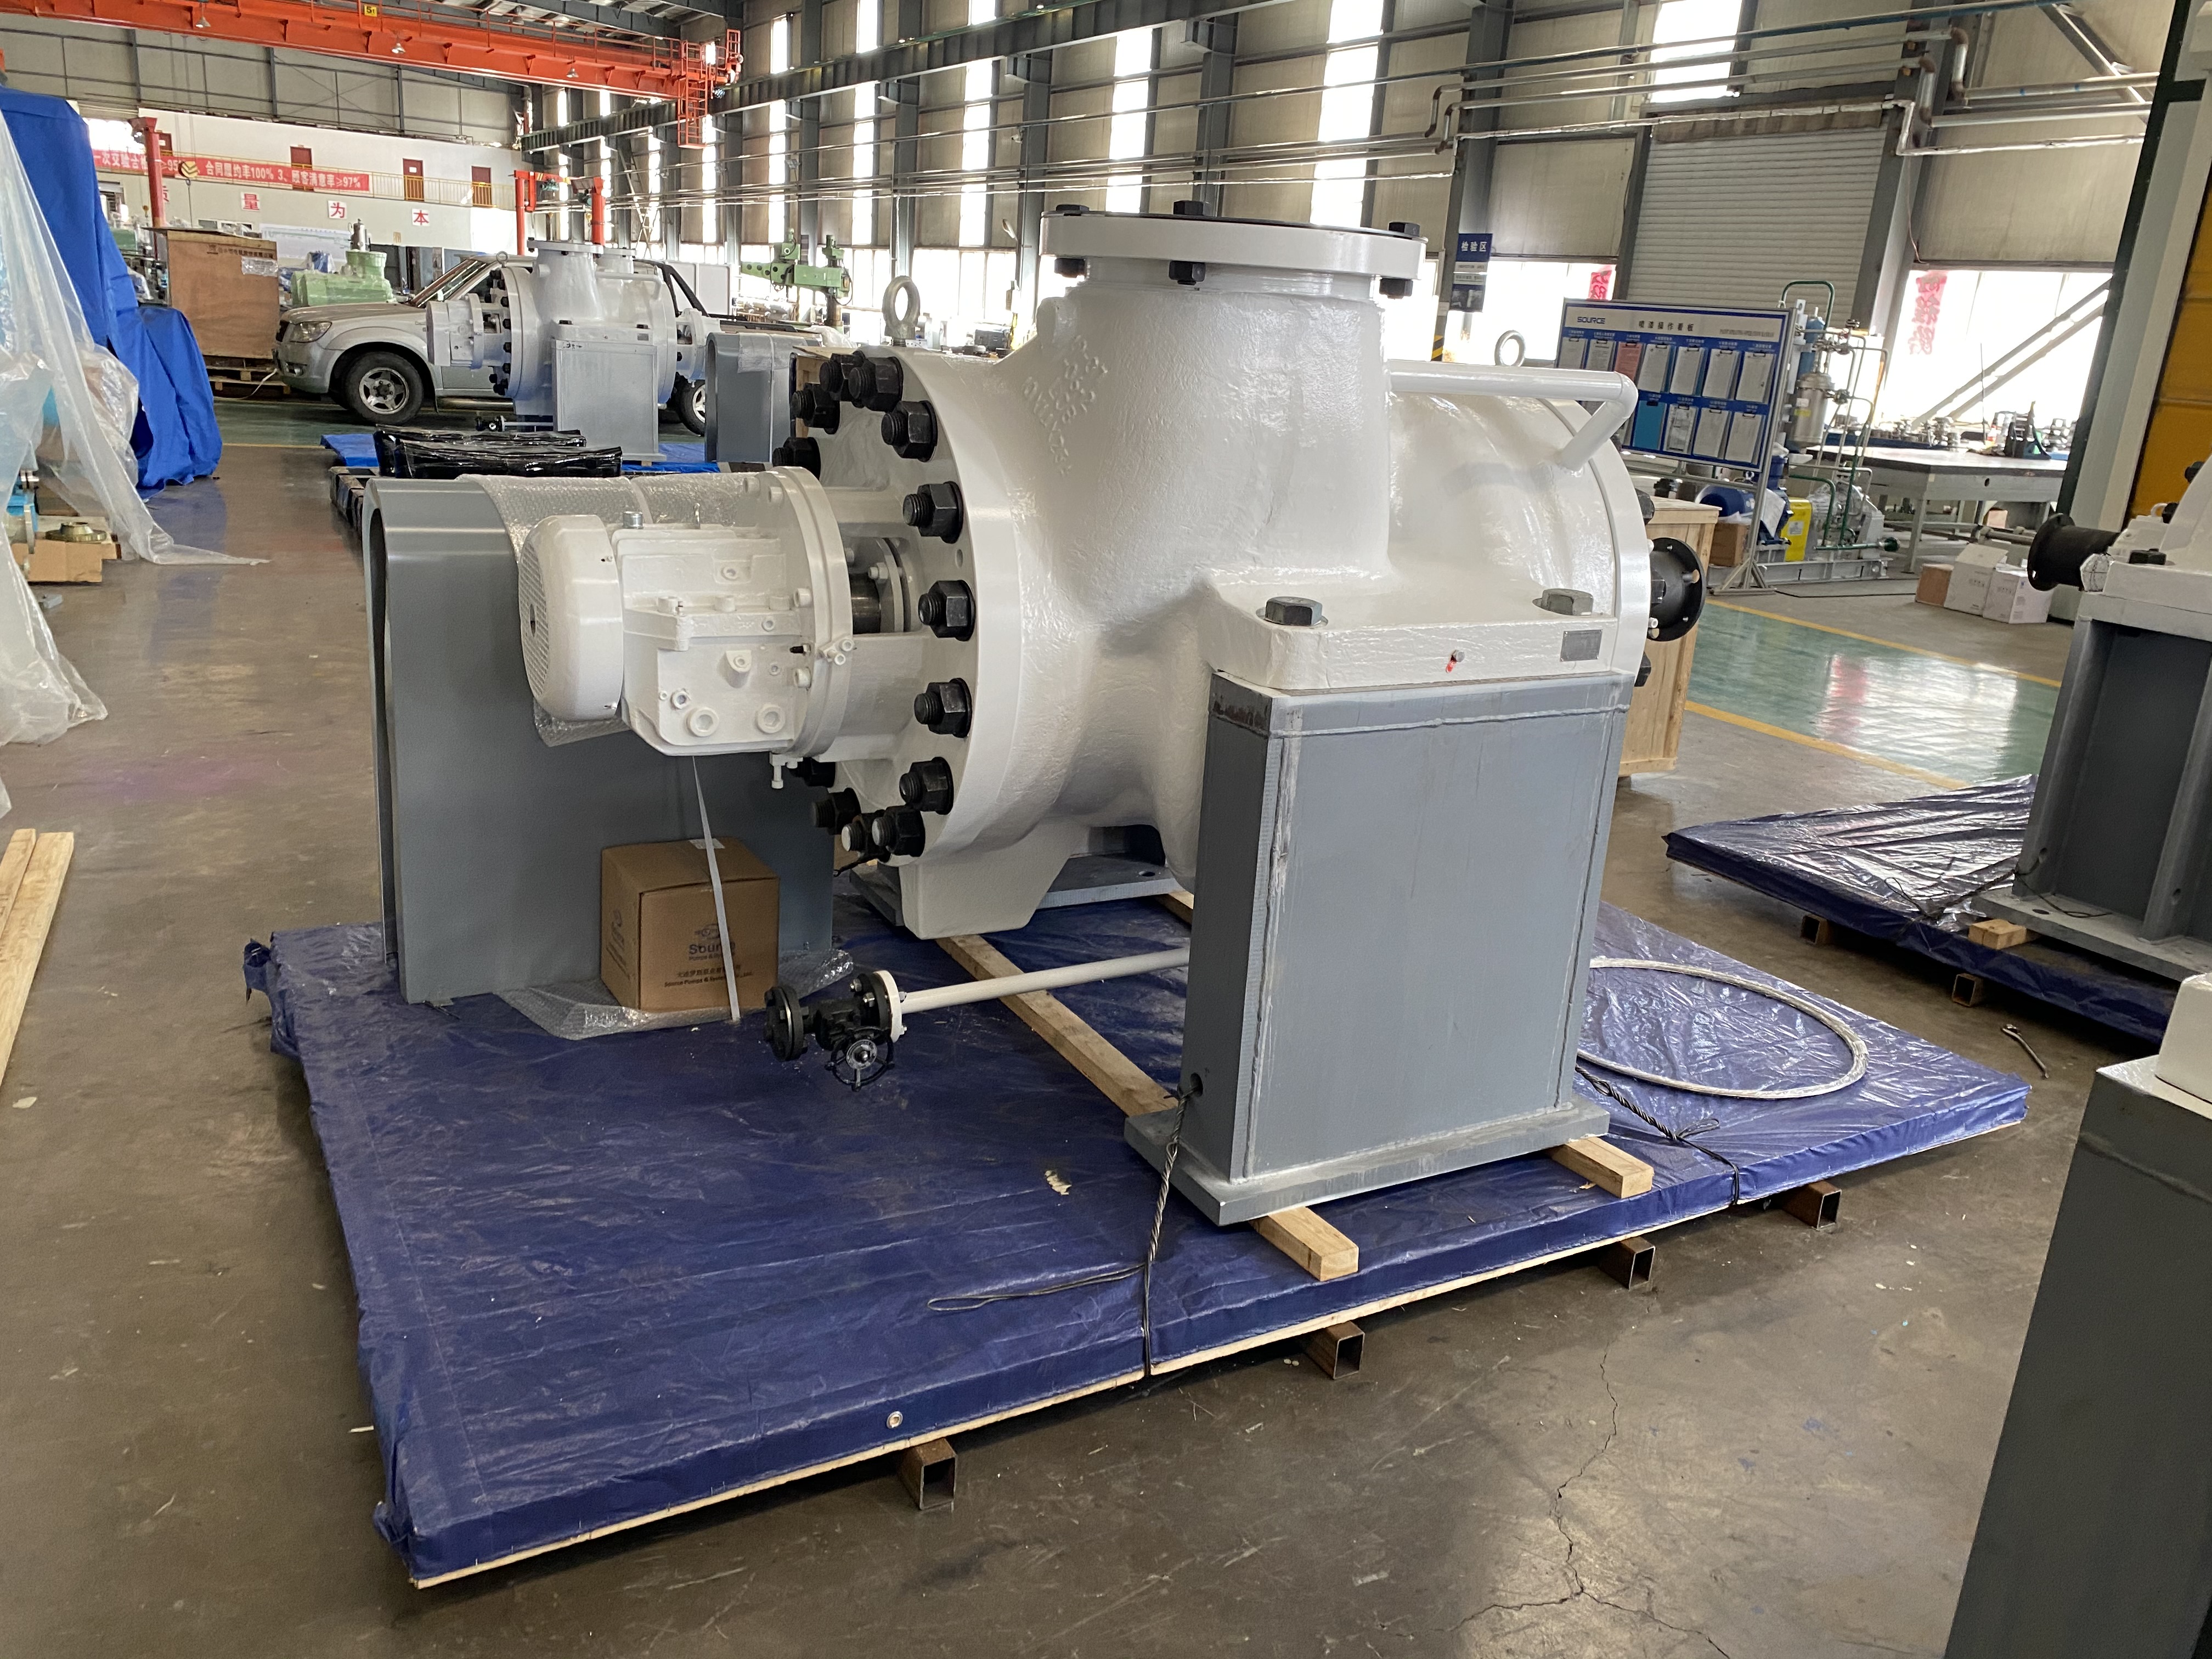 Two-stage BB2 pump exported to Russia Lukoil